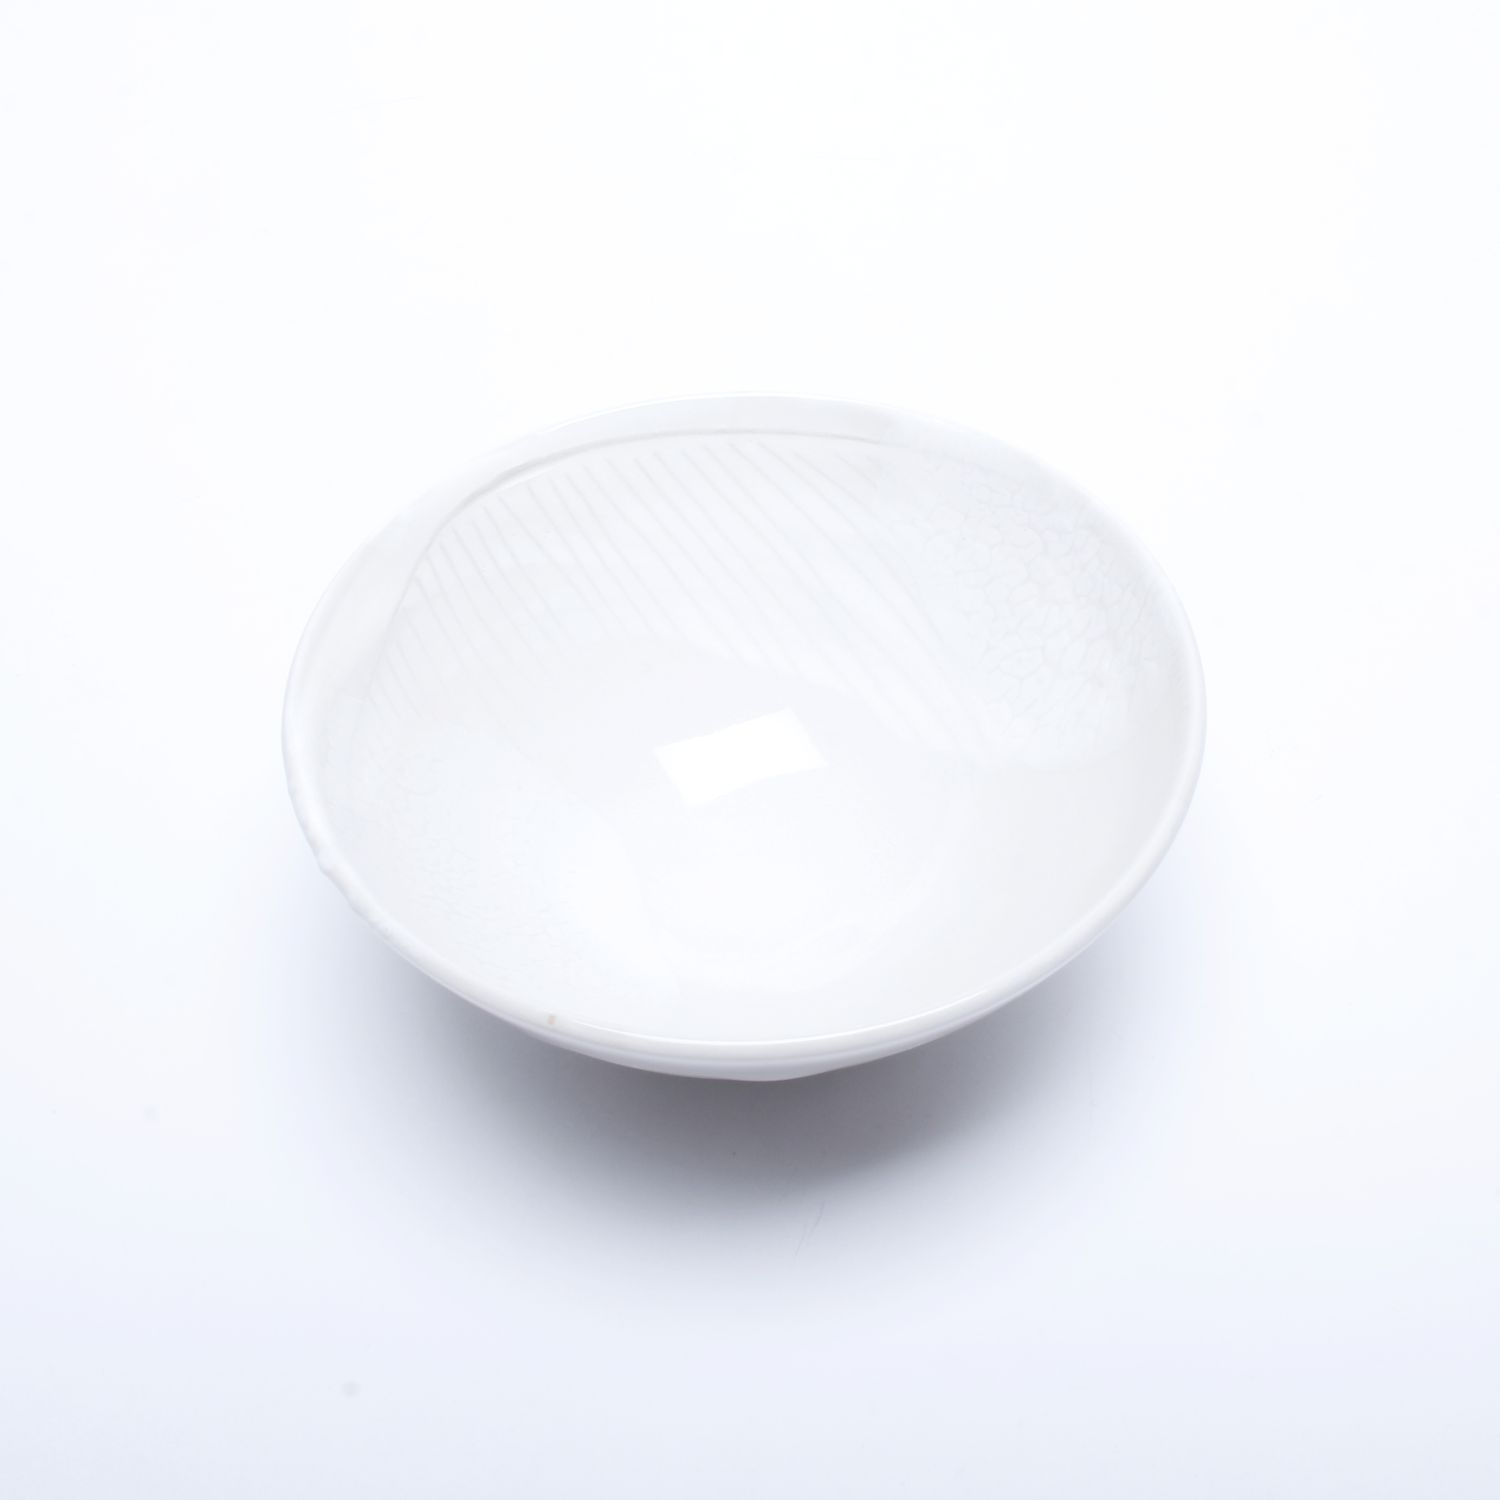 Jane Wilson: Small Bowl Product Image 2 of 4